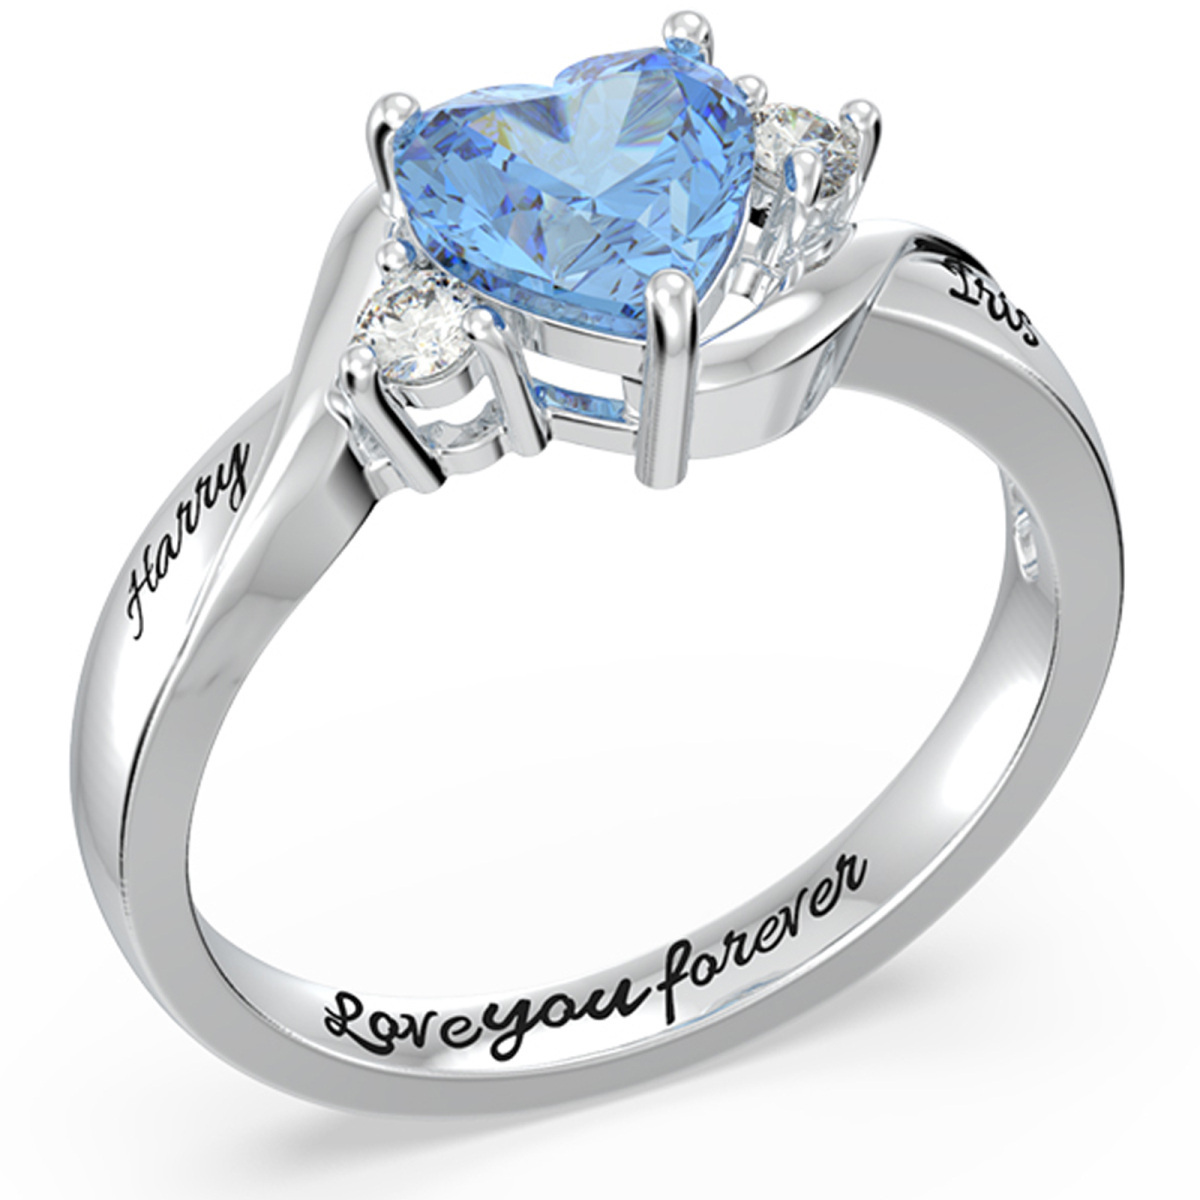 10K White Gold Heart Cubic Zirconia Personalized Engraving & Birthstone Ring-1